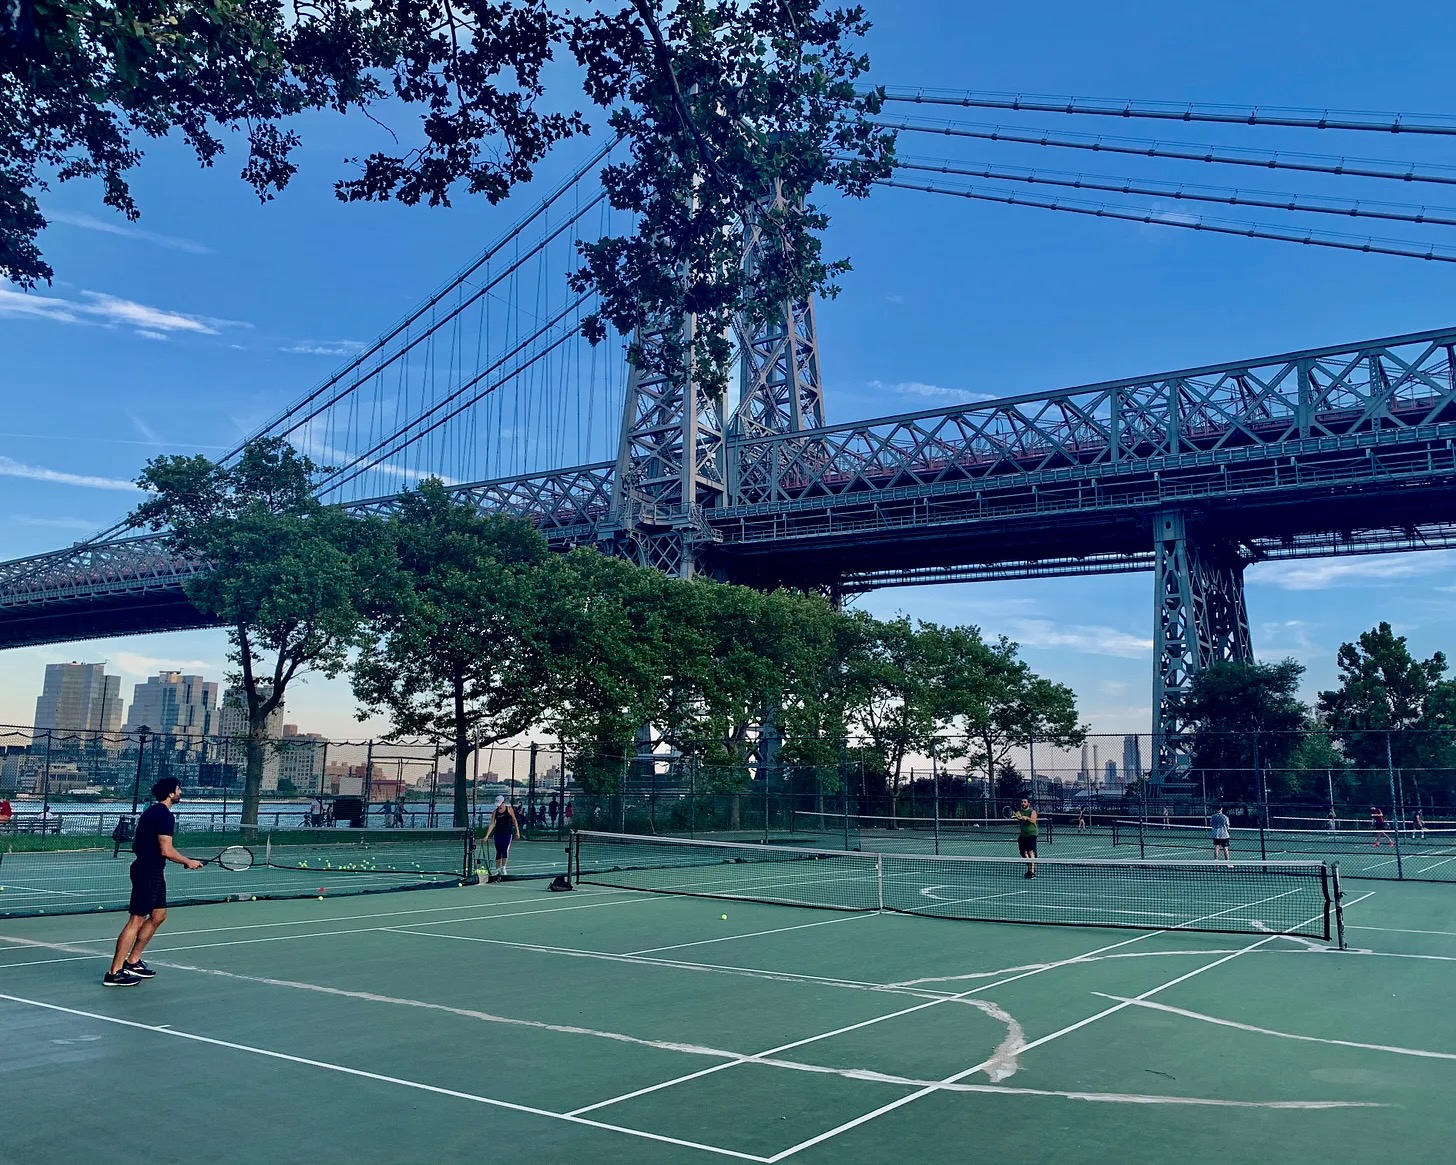 The Ultimate Demise of New Yorks East River Courts?